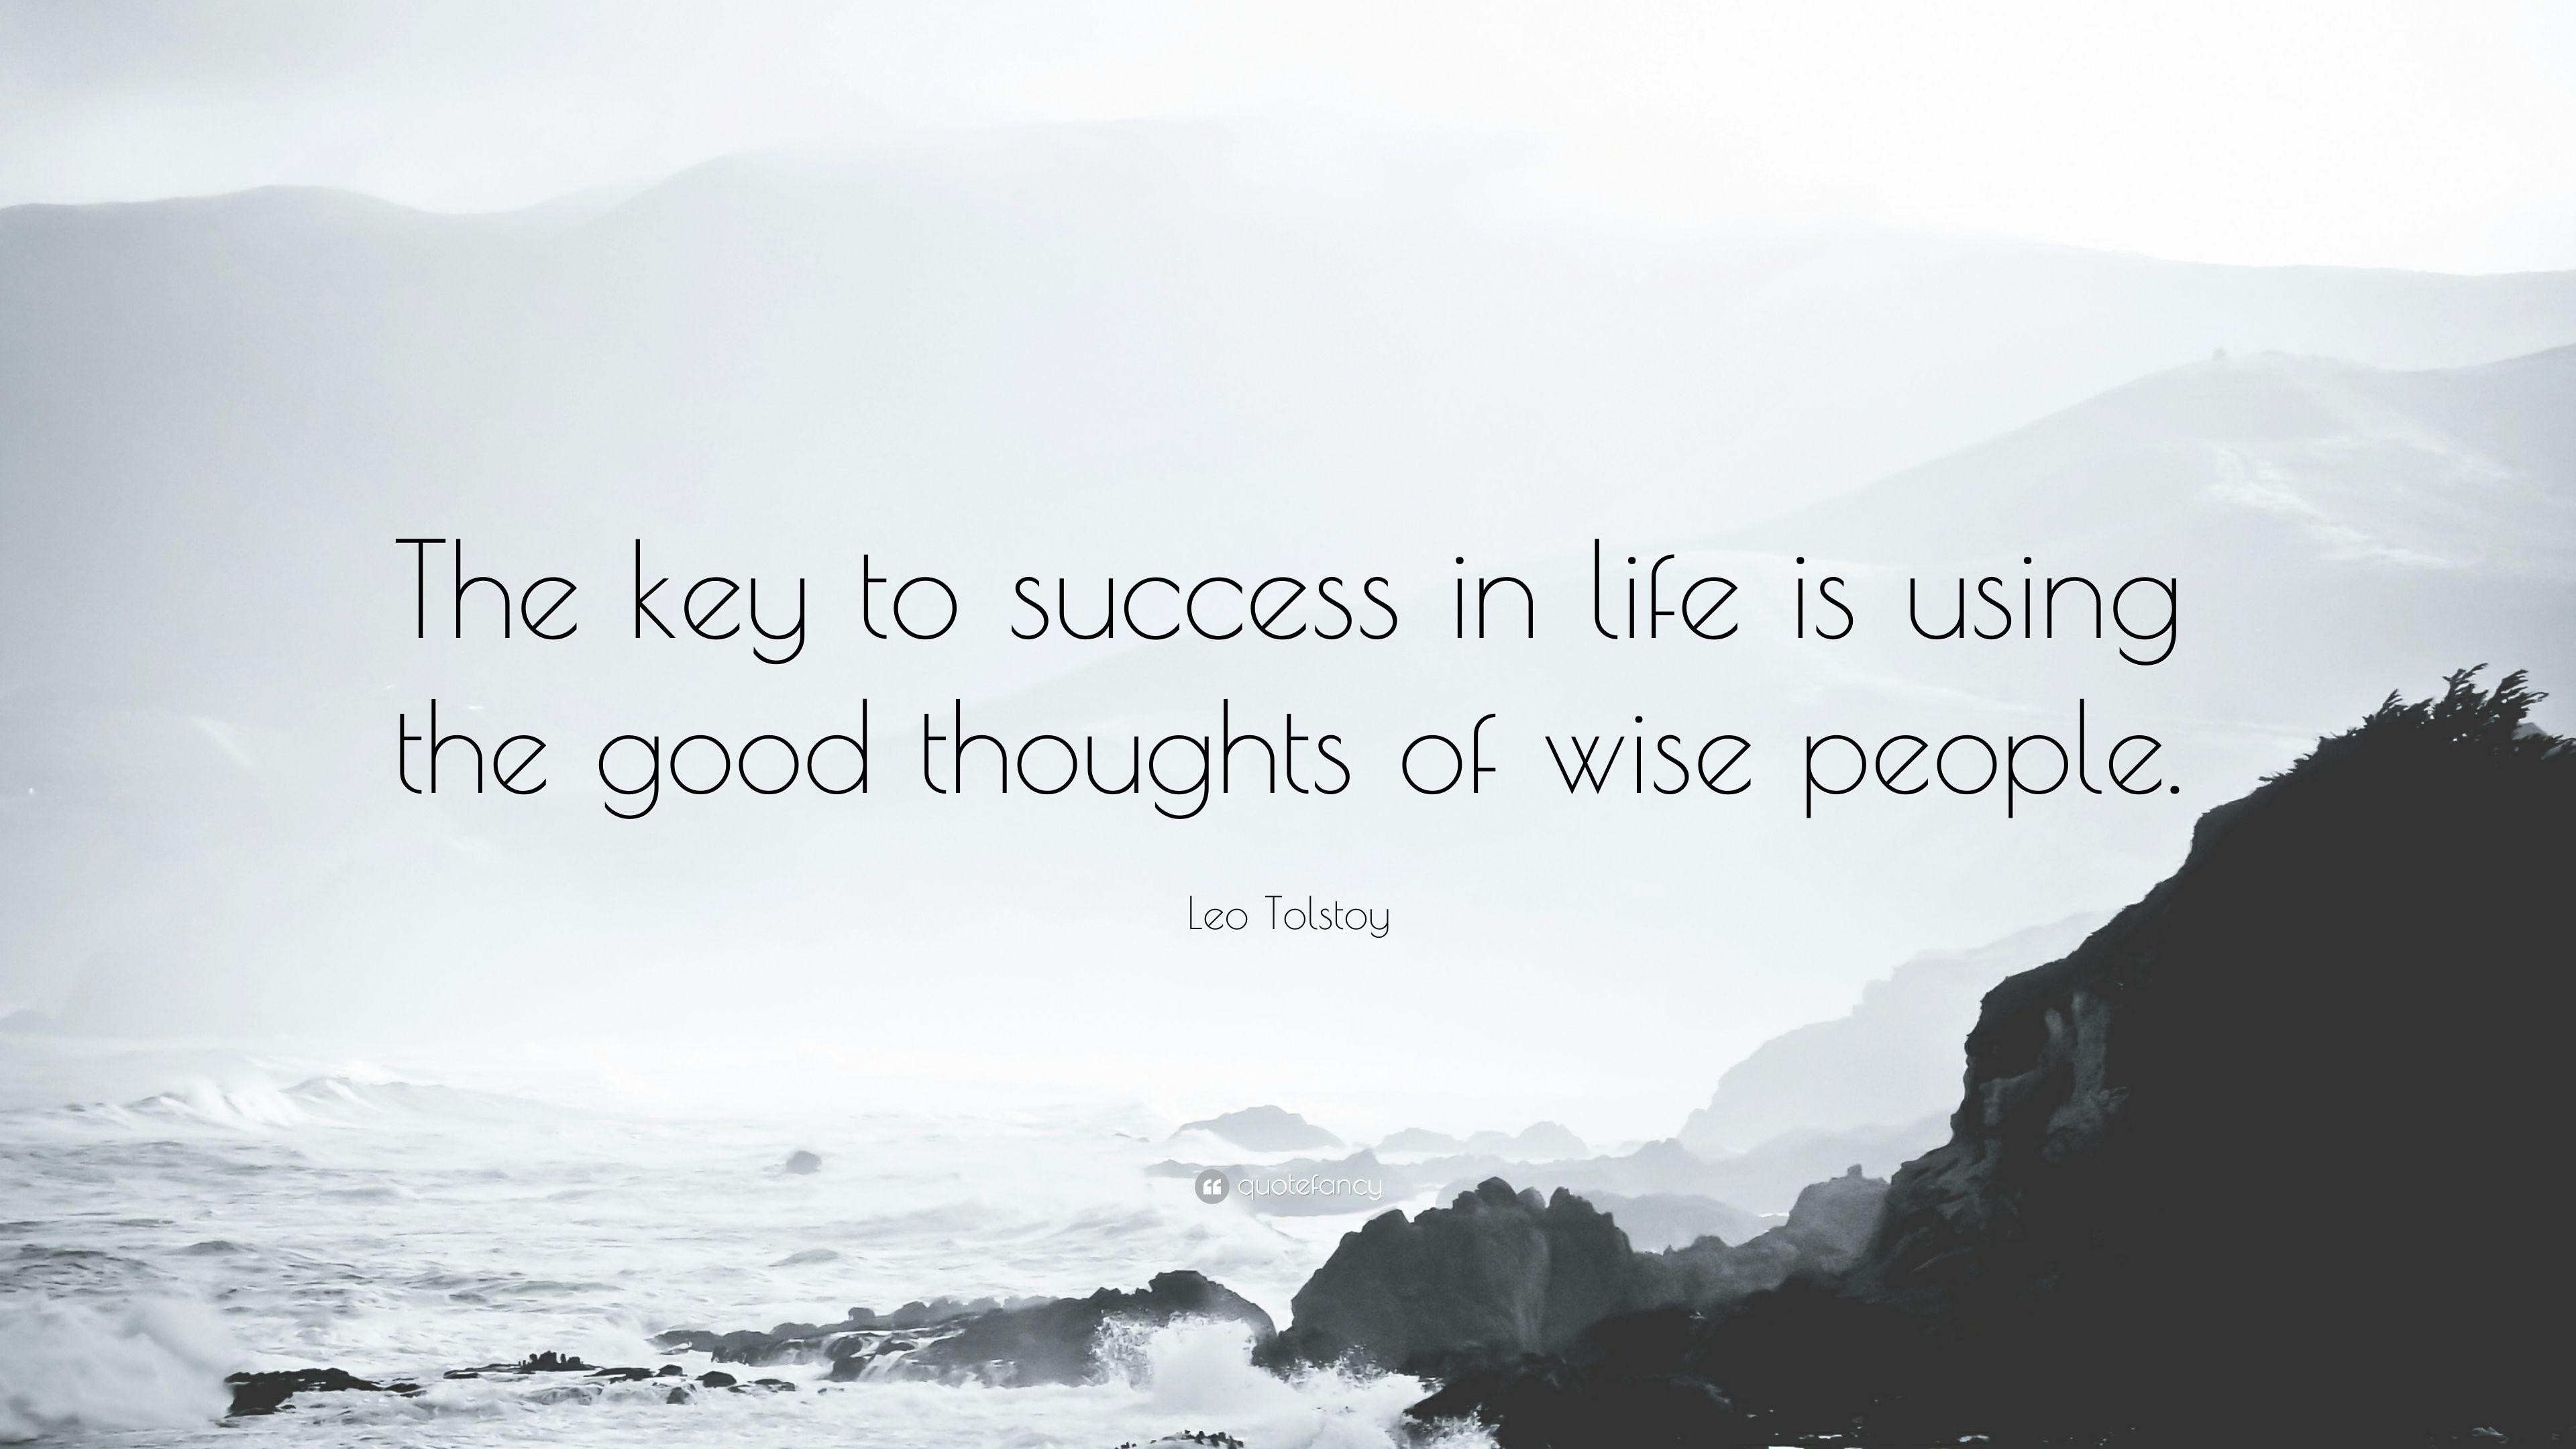 Leo Tolstoy Quote: “The key to success in life is using the good